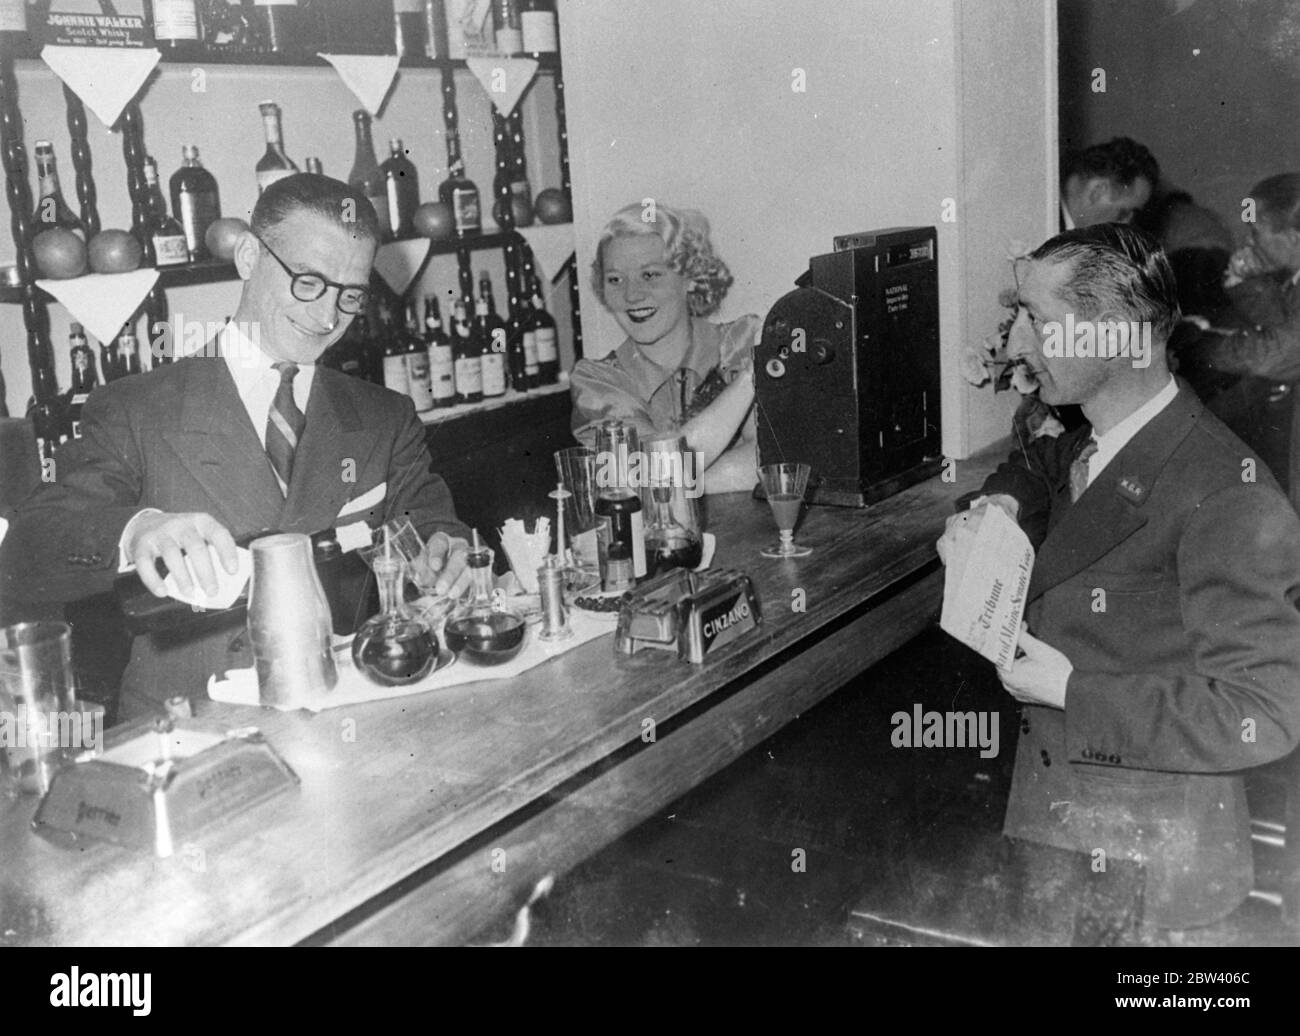 Stravinsky's secretary now runs cocktail bar with London dancer as hostess . Gilbert Ramognie , former secretary of Serge Stravinsky , the French Swindler , has now opened a cocktail bar called ' Merry go Round ' , in the Rue de Berri just off the Champs Elysees , Paris . Romaginno was acquitted on charges of receiving stolen money after spending 23 months in prison . The hostess of the new bar is Madame Romagnino , the former Celia Nano , London dancer who was questioned by Scotland Yard officials in connection with the Stravinsky's case . The doorman of the bar is Henry Voix who was Stavisky Stock Photo